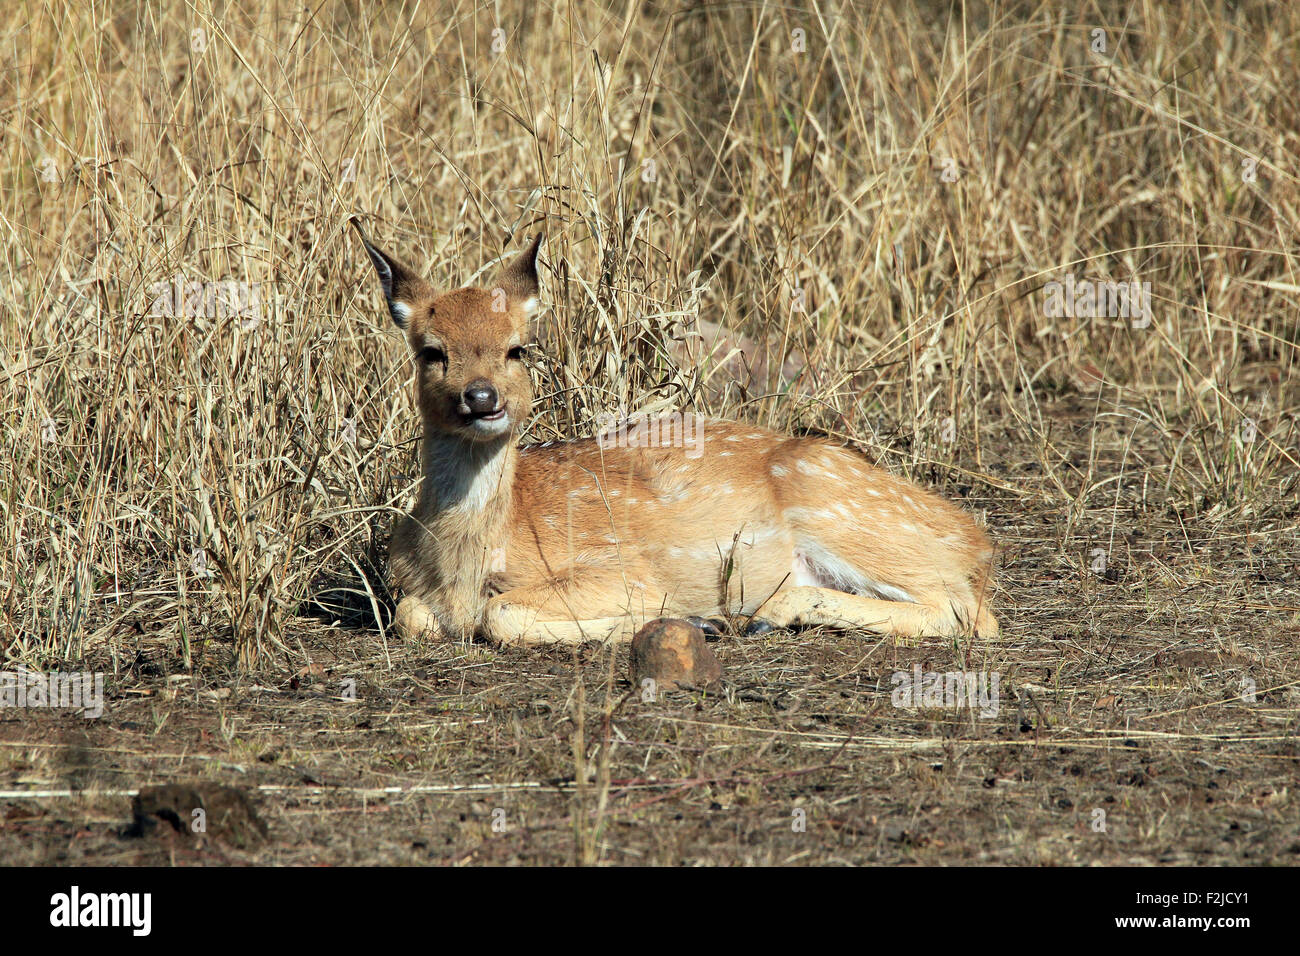 Young Chital (Axis Axis, aka Spotted Deer, Axis Deer) Resting on the Ground. Ranthambhore, Rajasthan, India Stock Photo